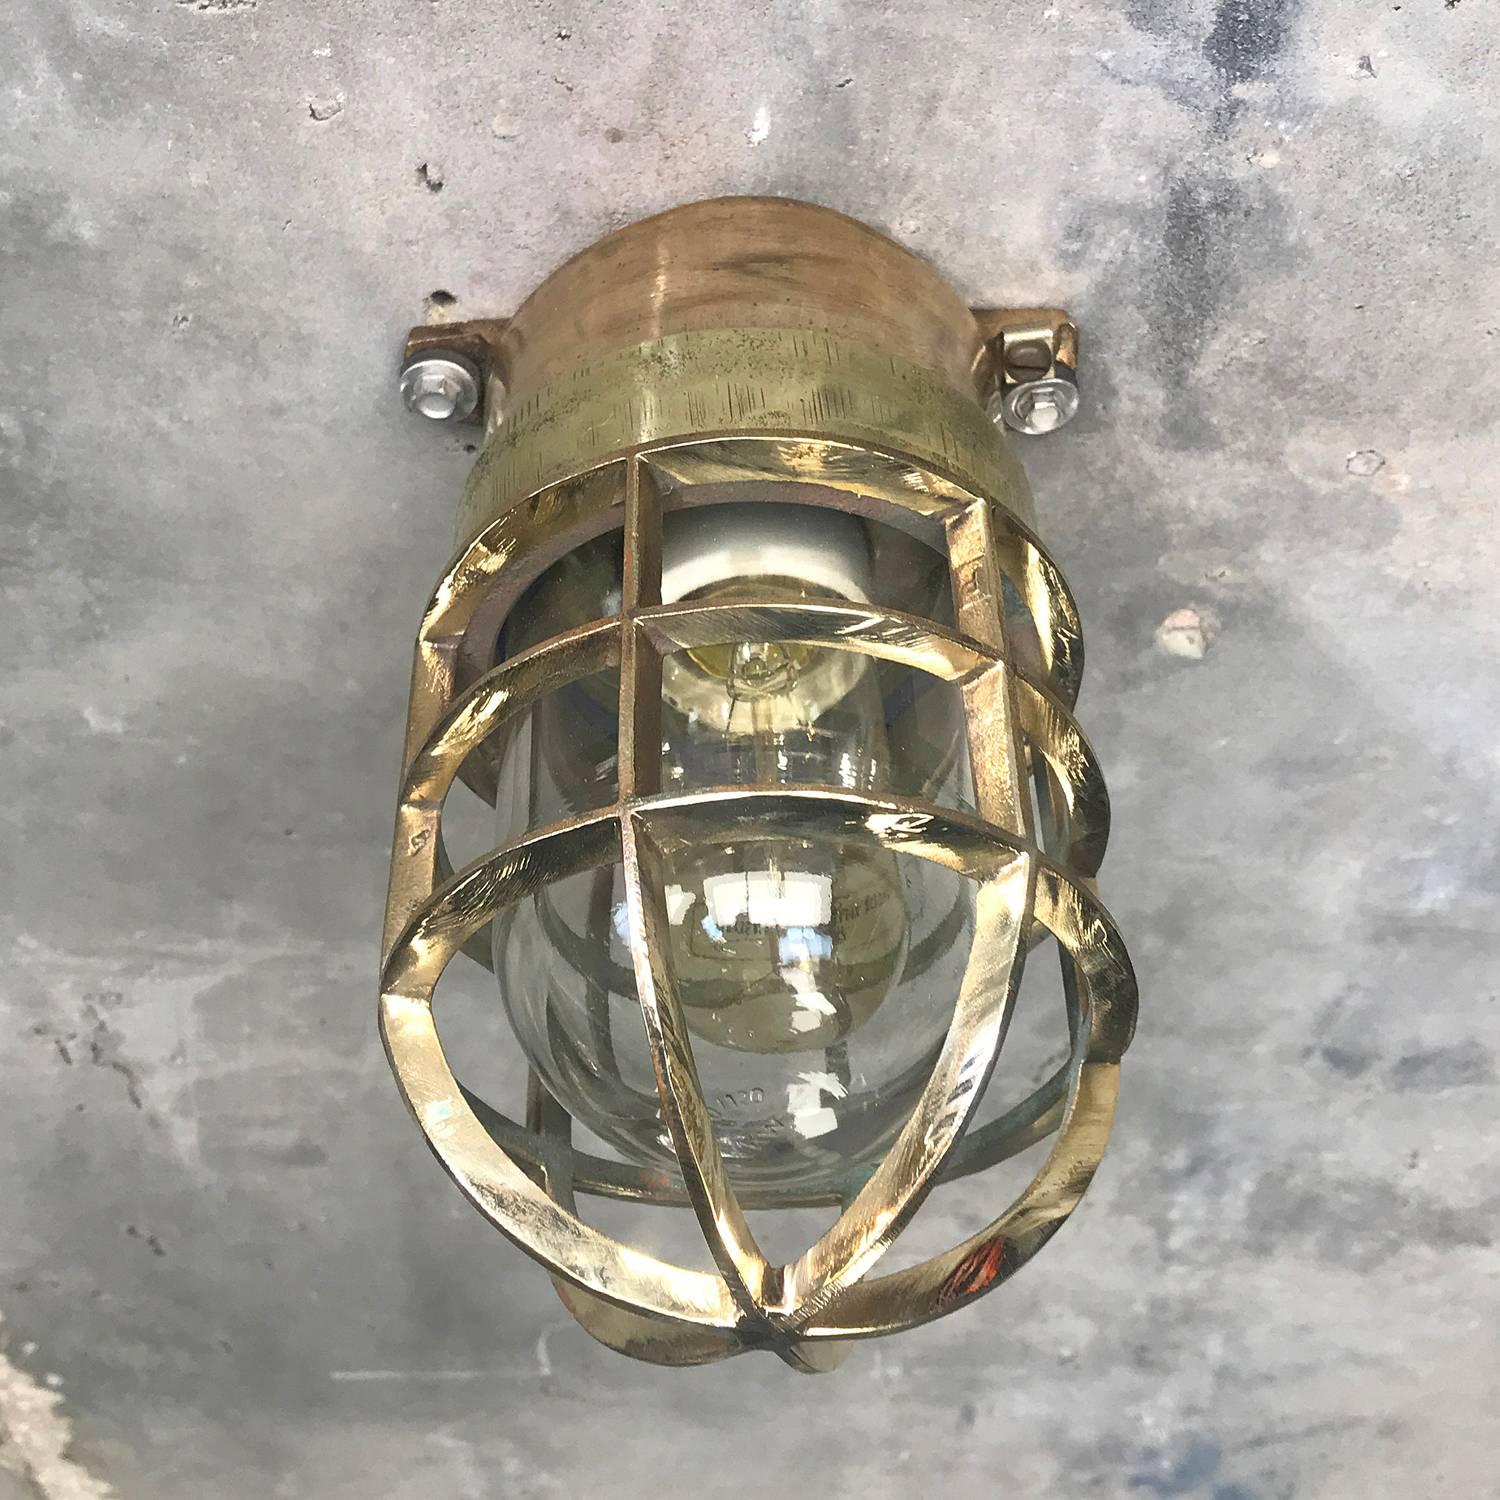 1970s German Explosion Proof Wall Light Cast Bronze, Brass, Glass Shade & Cage For Sale 4